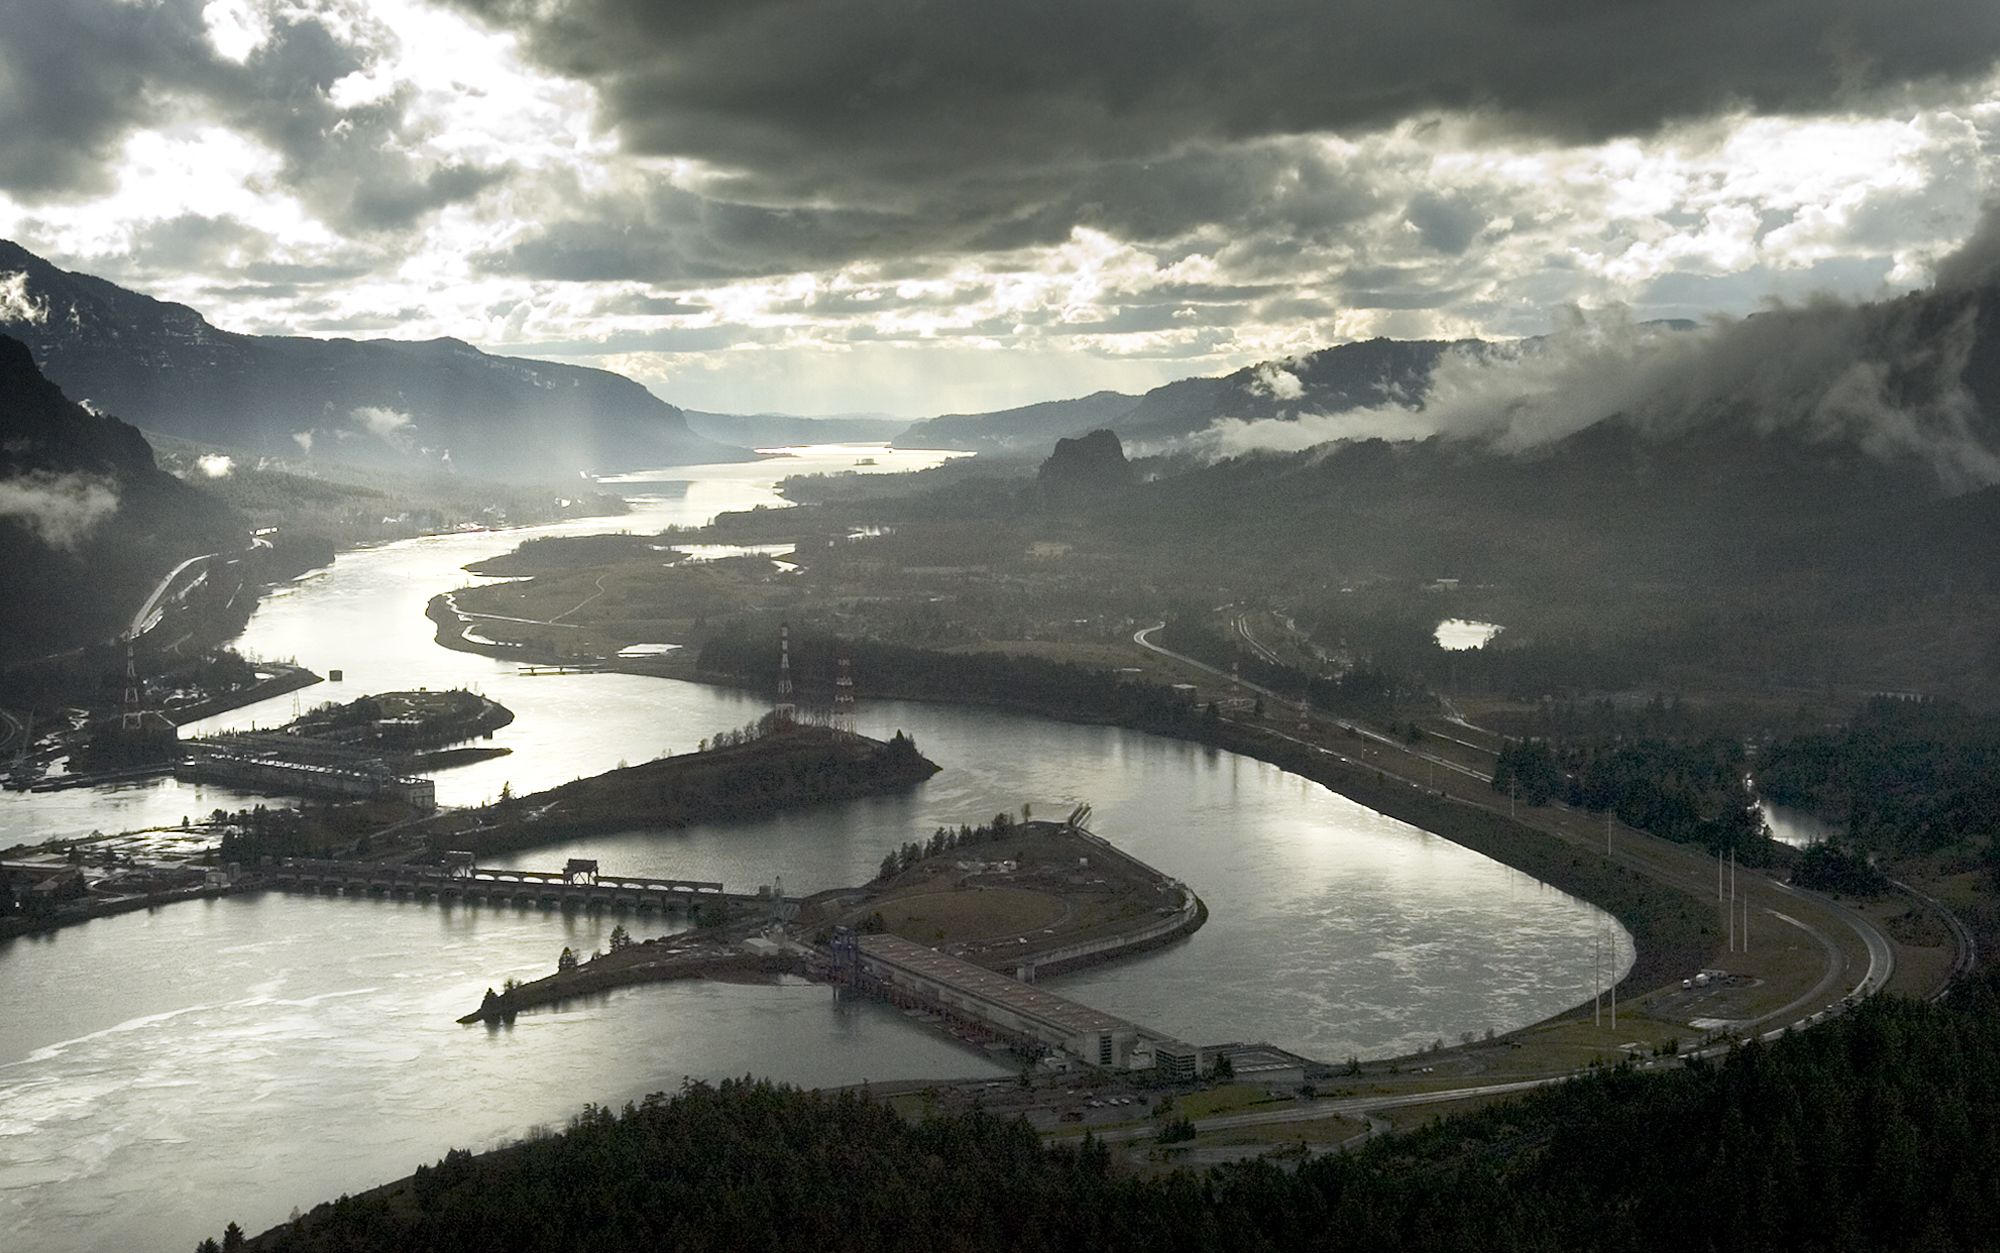 This aerial photograph of the Columbia River Gorge from 2006 shows the view looking west with Bonneville Dam in the foreground.